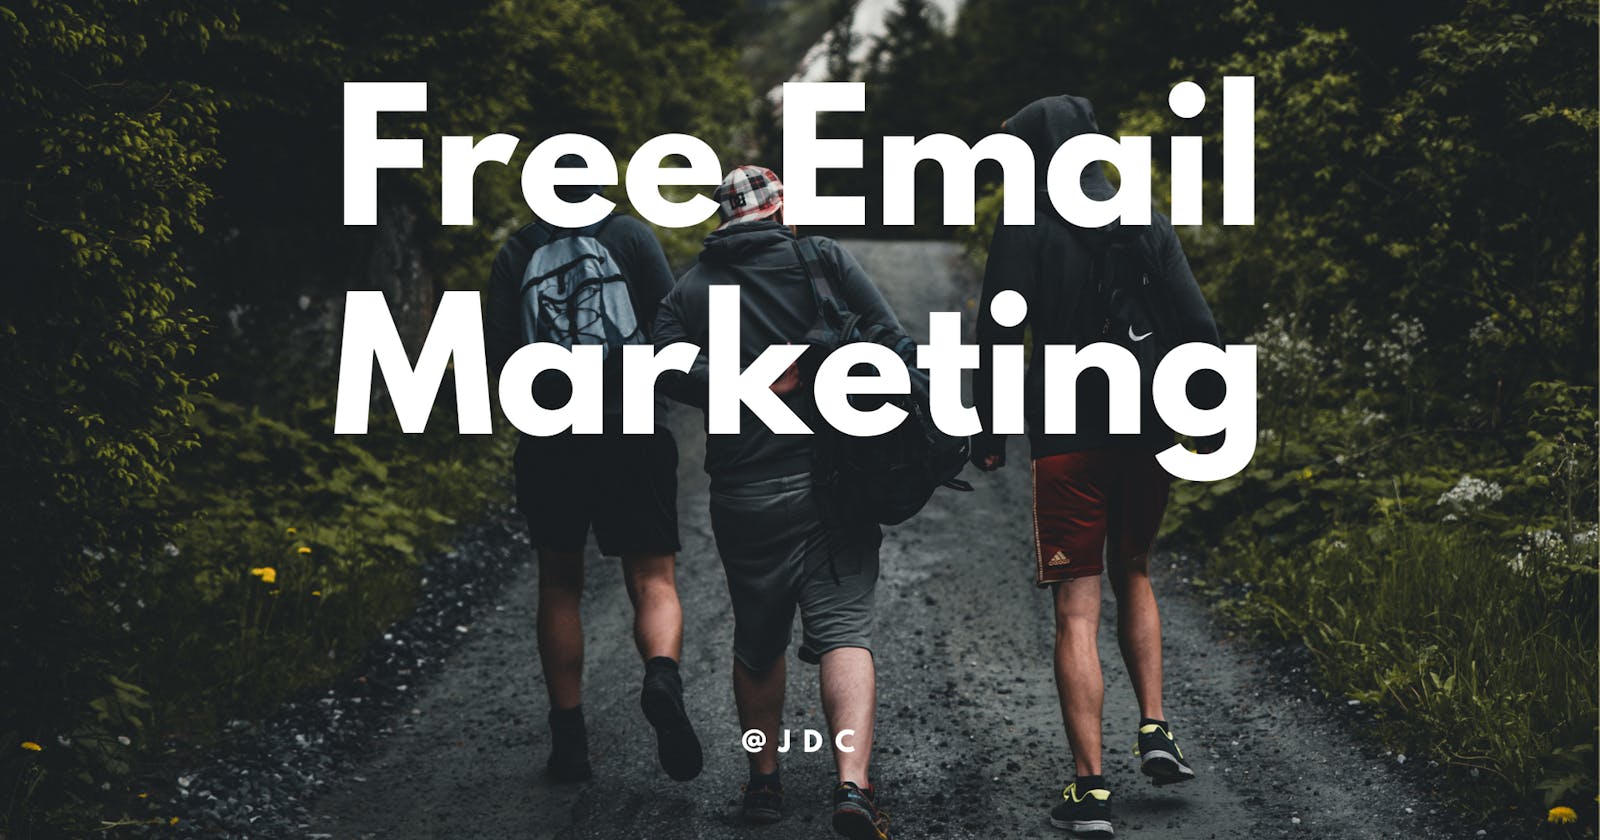 The Best Marketing Move You Can Make Today? 🤔 Get Free Email Marketing from MailChimp. ✨